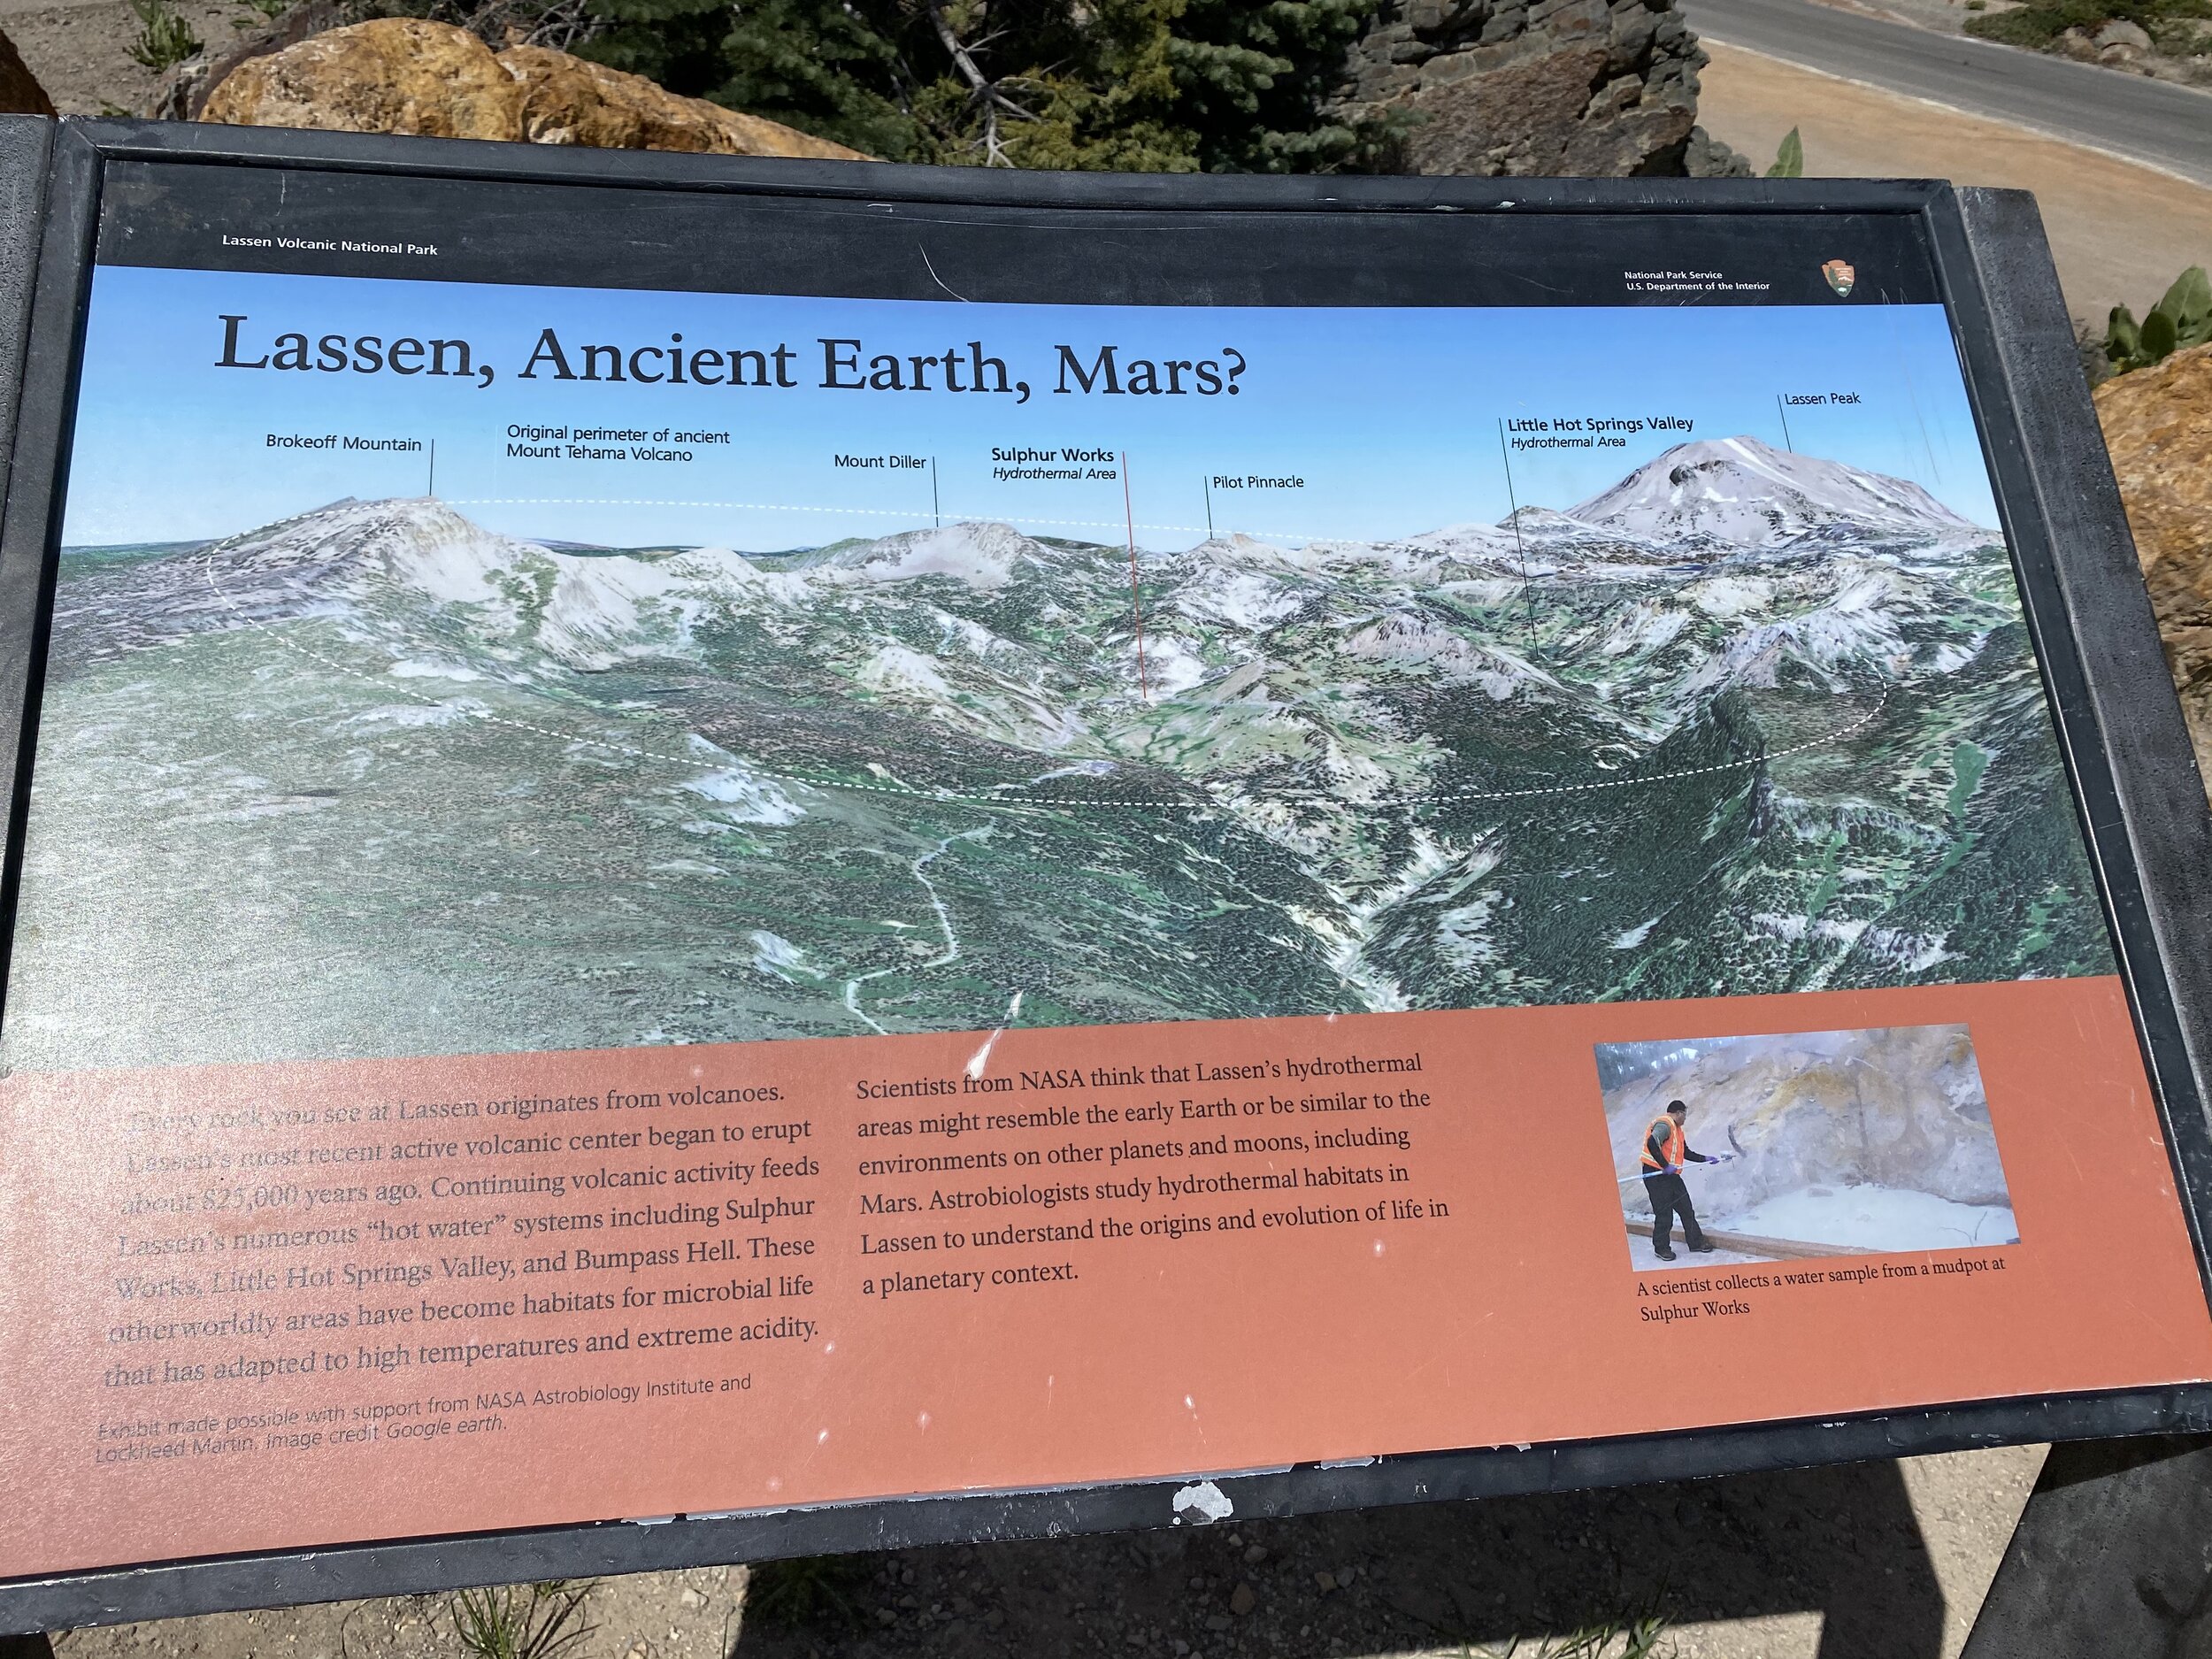 We found the most interesting part that "Scientists from NASA think that Lassen's hydrothermal areas might resemble the early Earth or be similar to the environments on other planets and moons, including Mars."